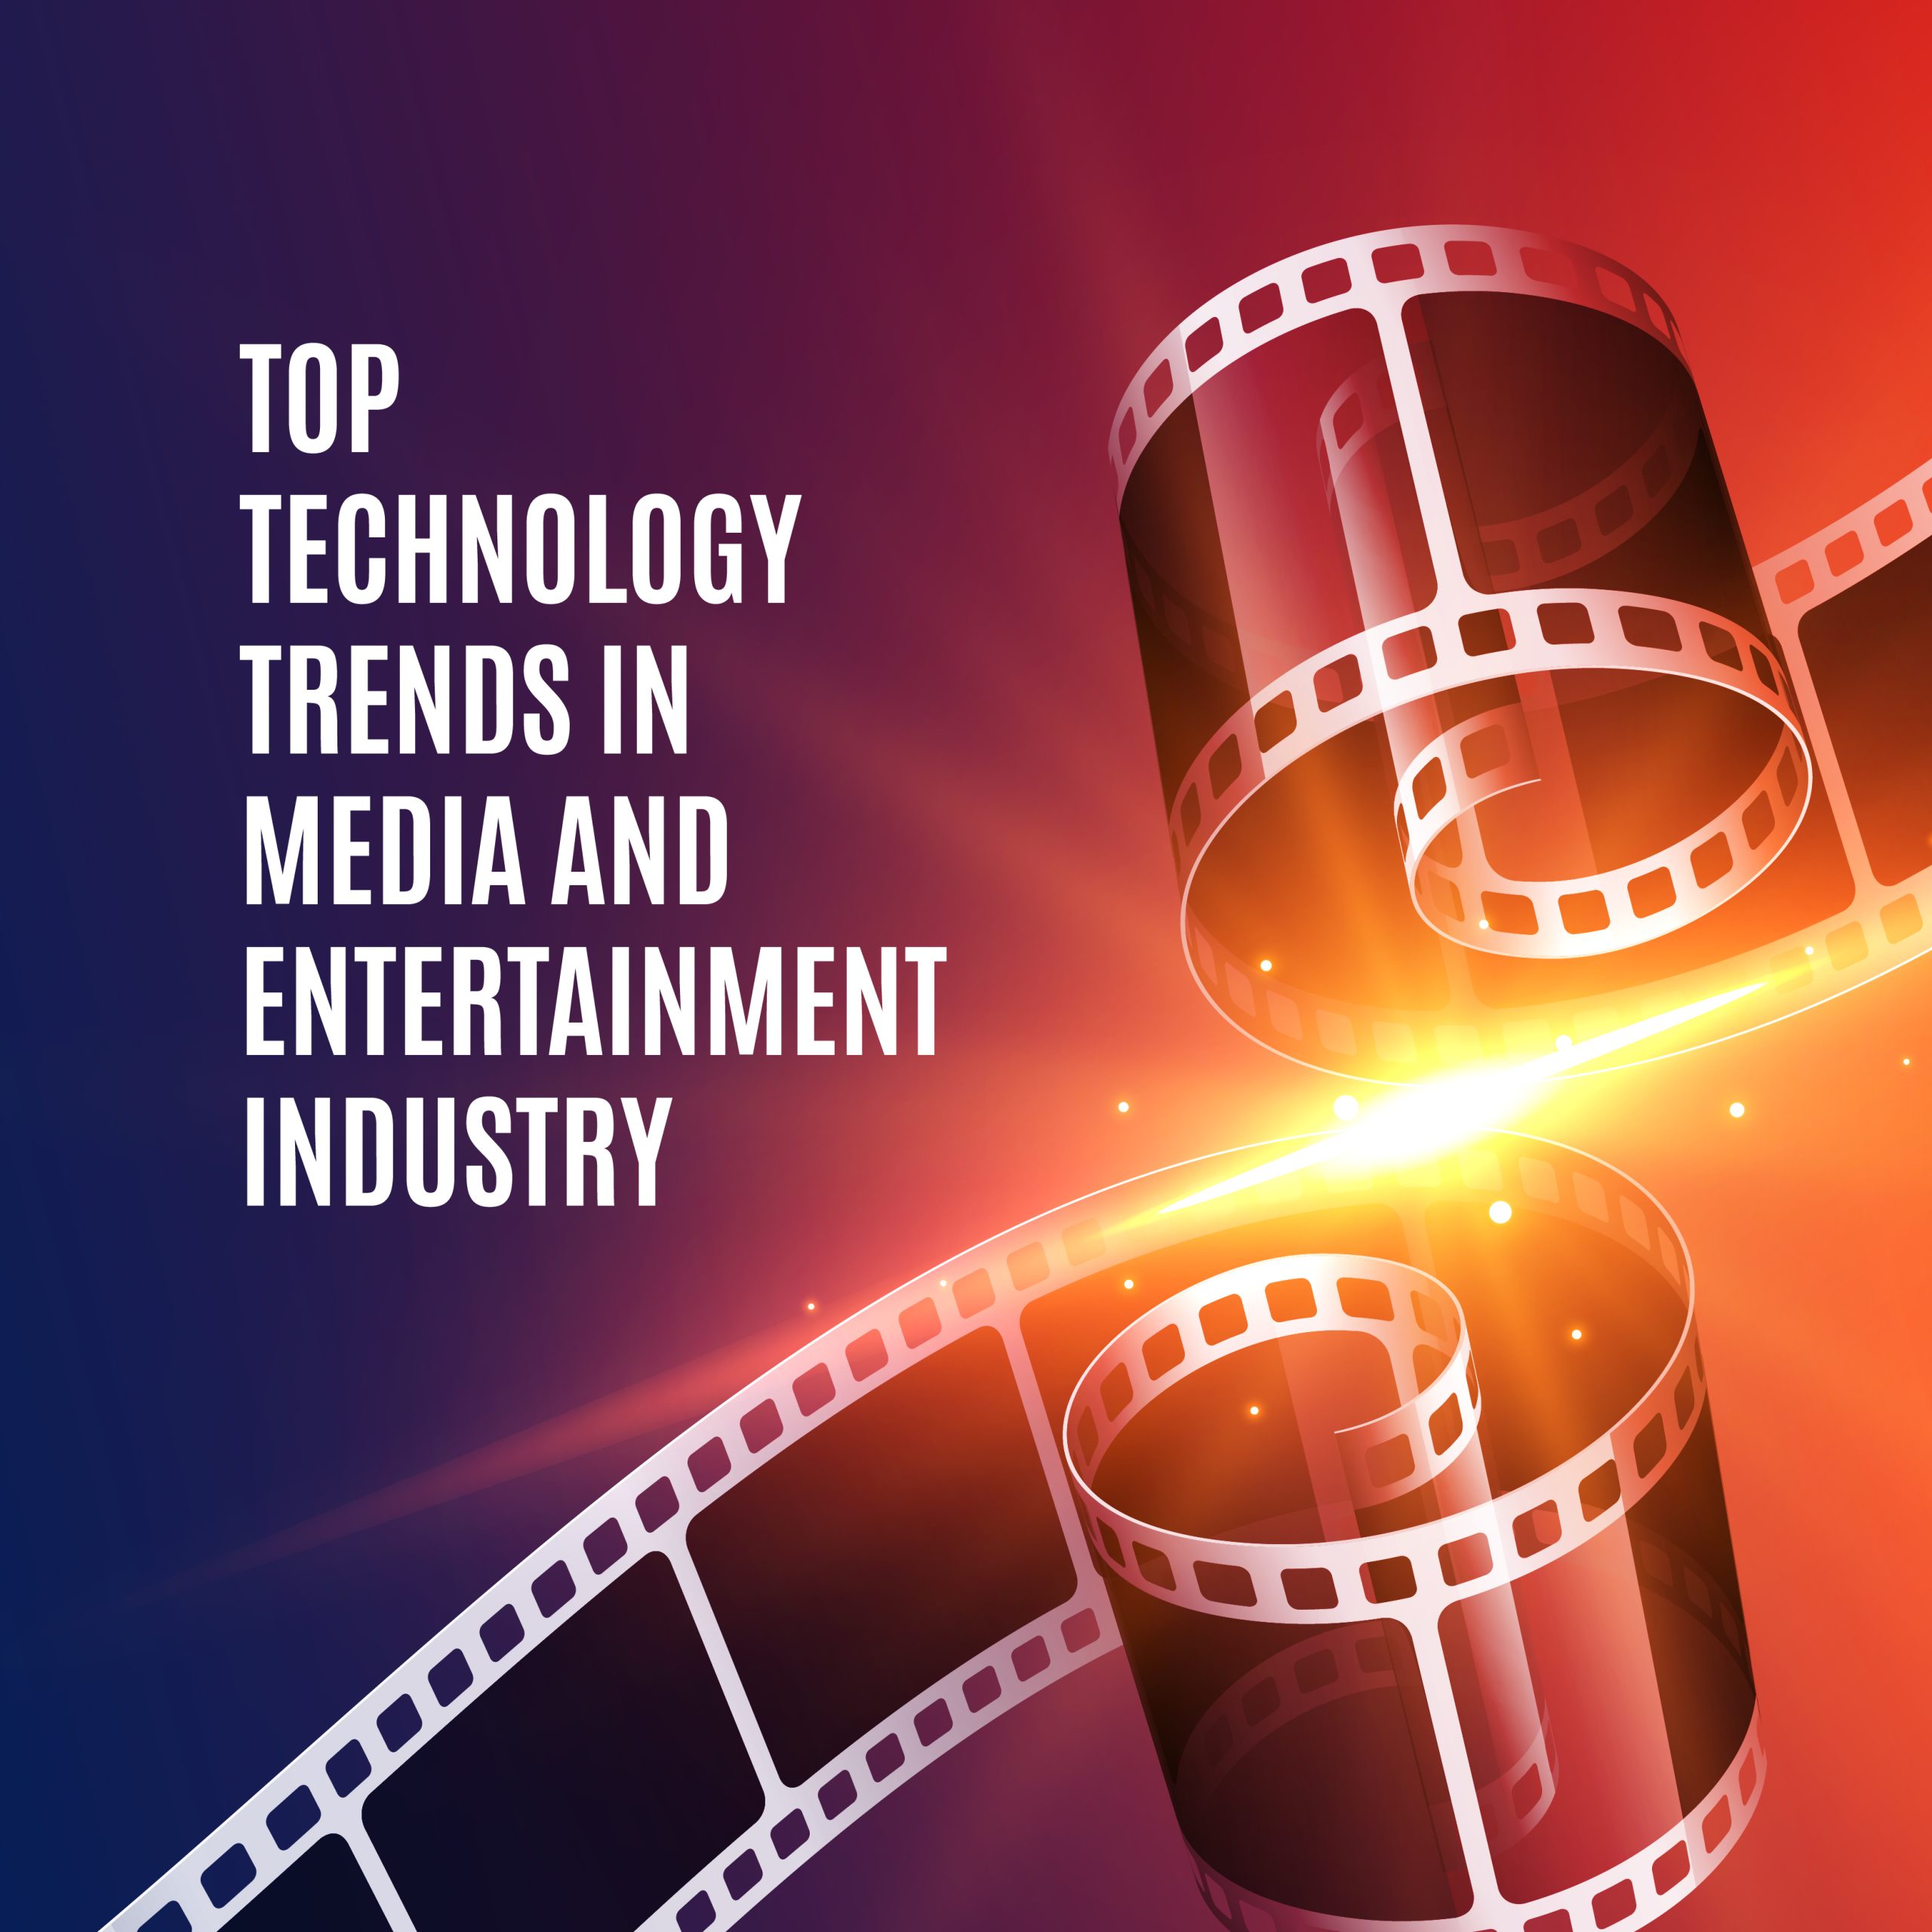 Top Technology Trends In Media And Entertainment Industry